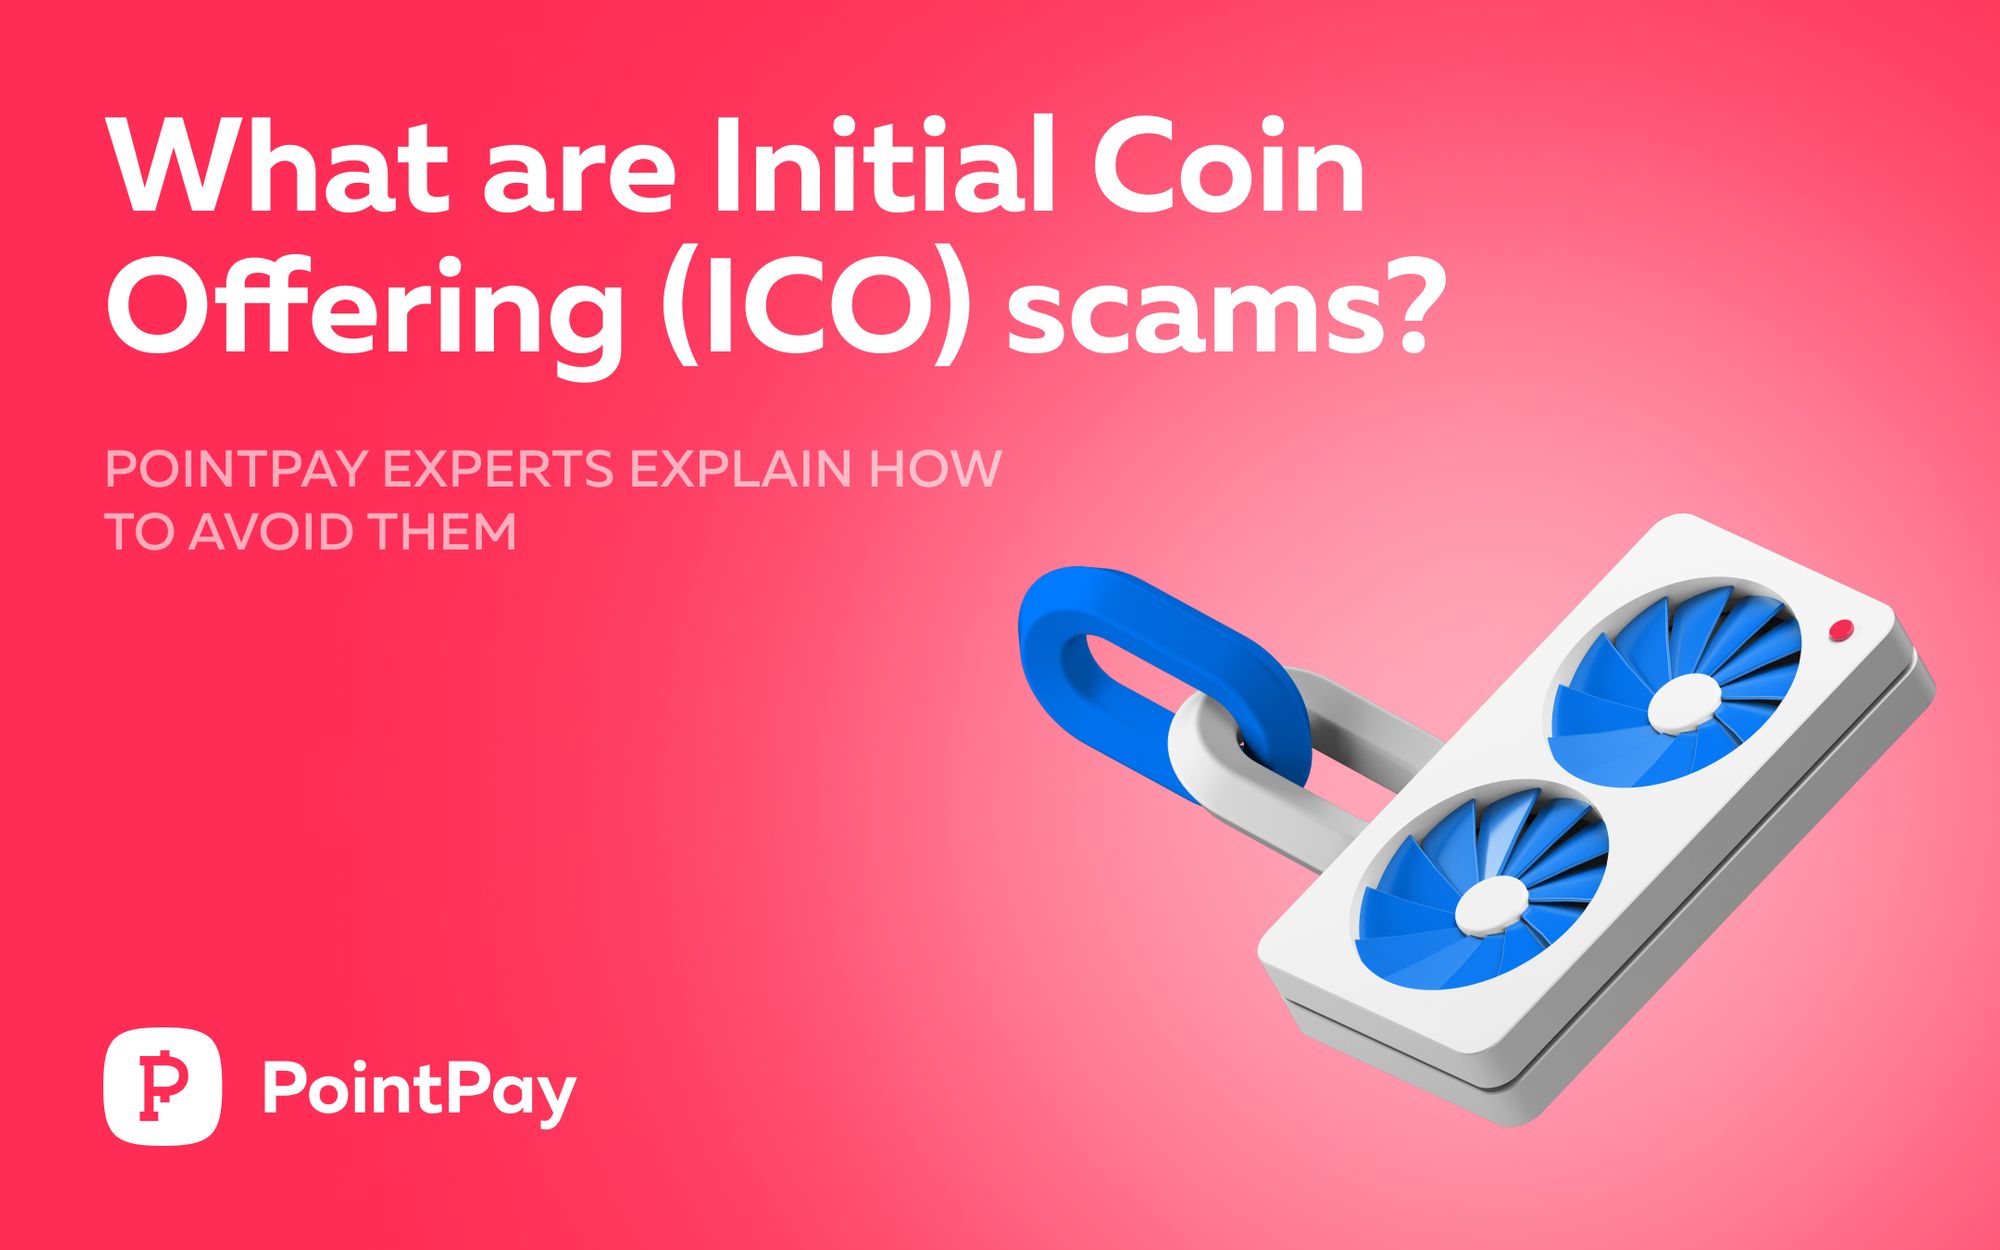 PointPay Experts: What Are Initial Coin Offering (ICO) Scams? How to Avoid Them?